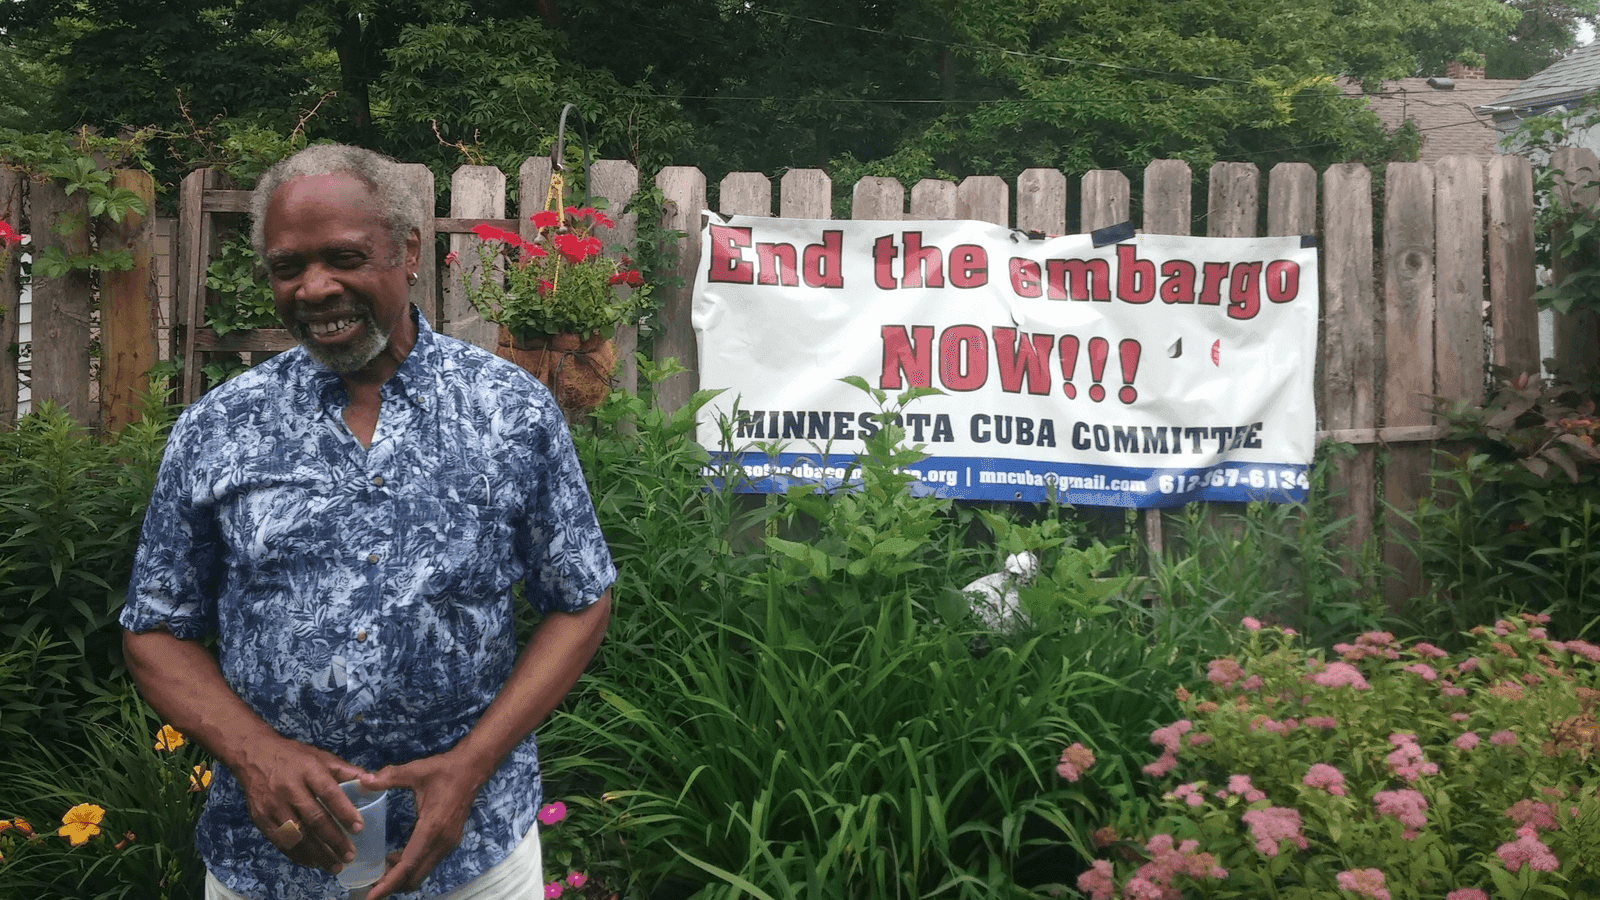 a meeting of a pro-cuba group in minnesota